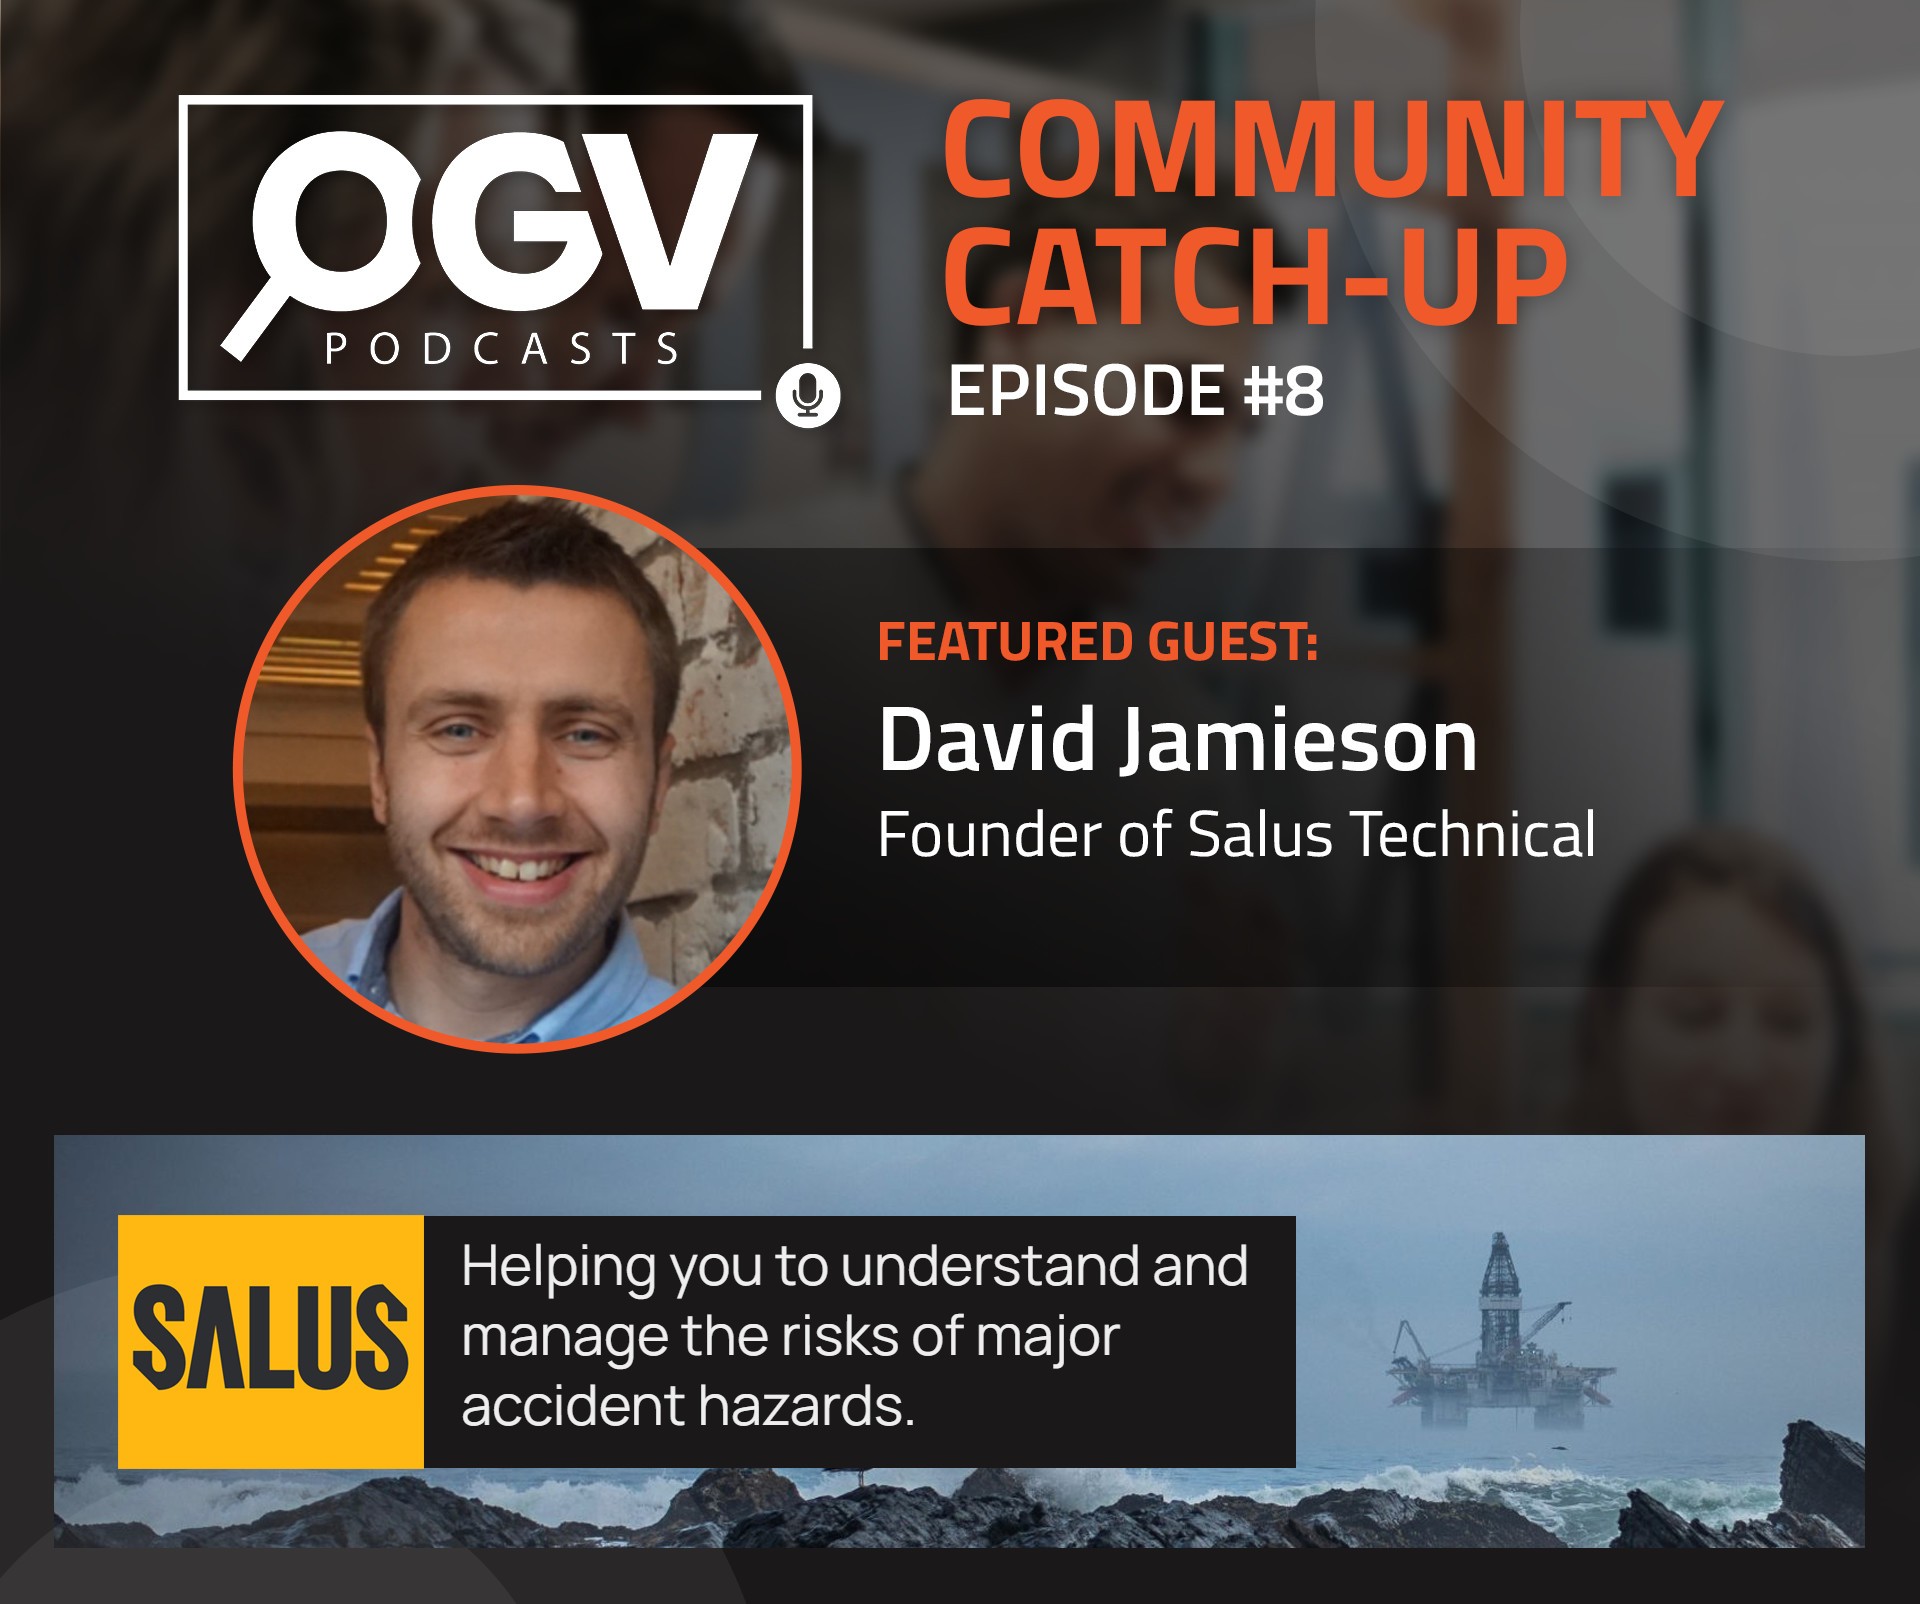 Risk management software and technical safety support for the energy industry with David Jamieson from Salus Technical